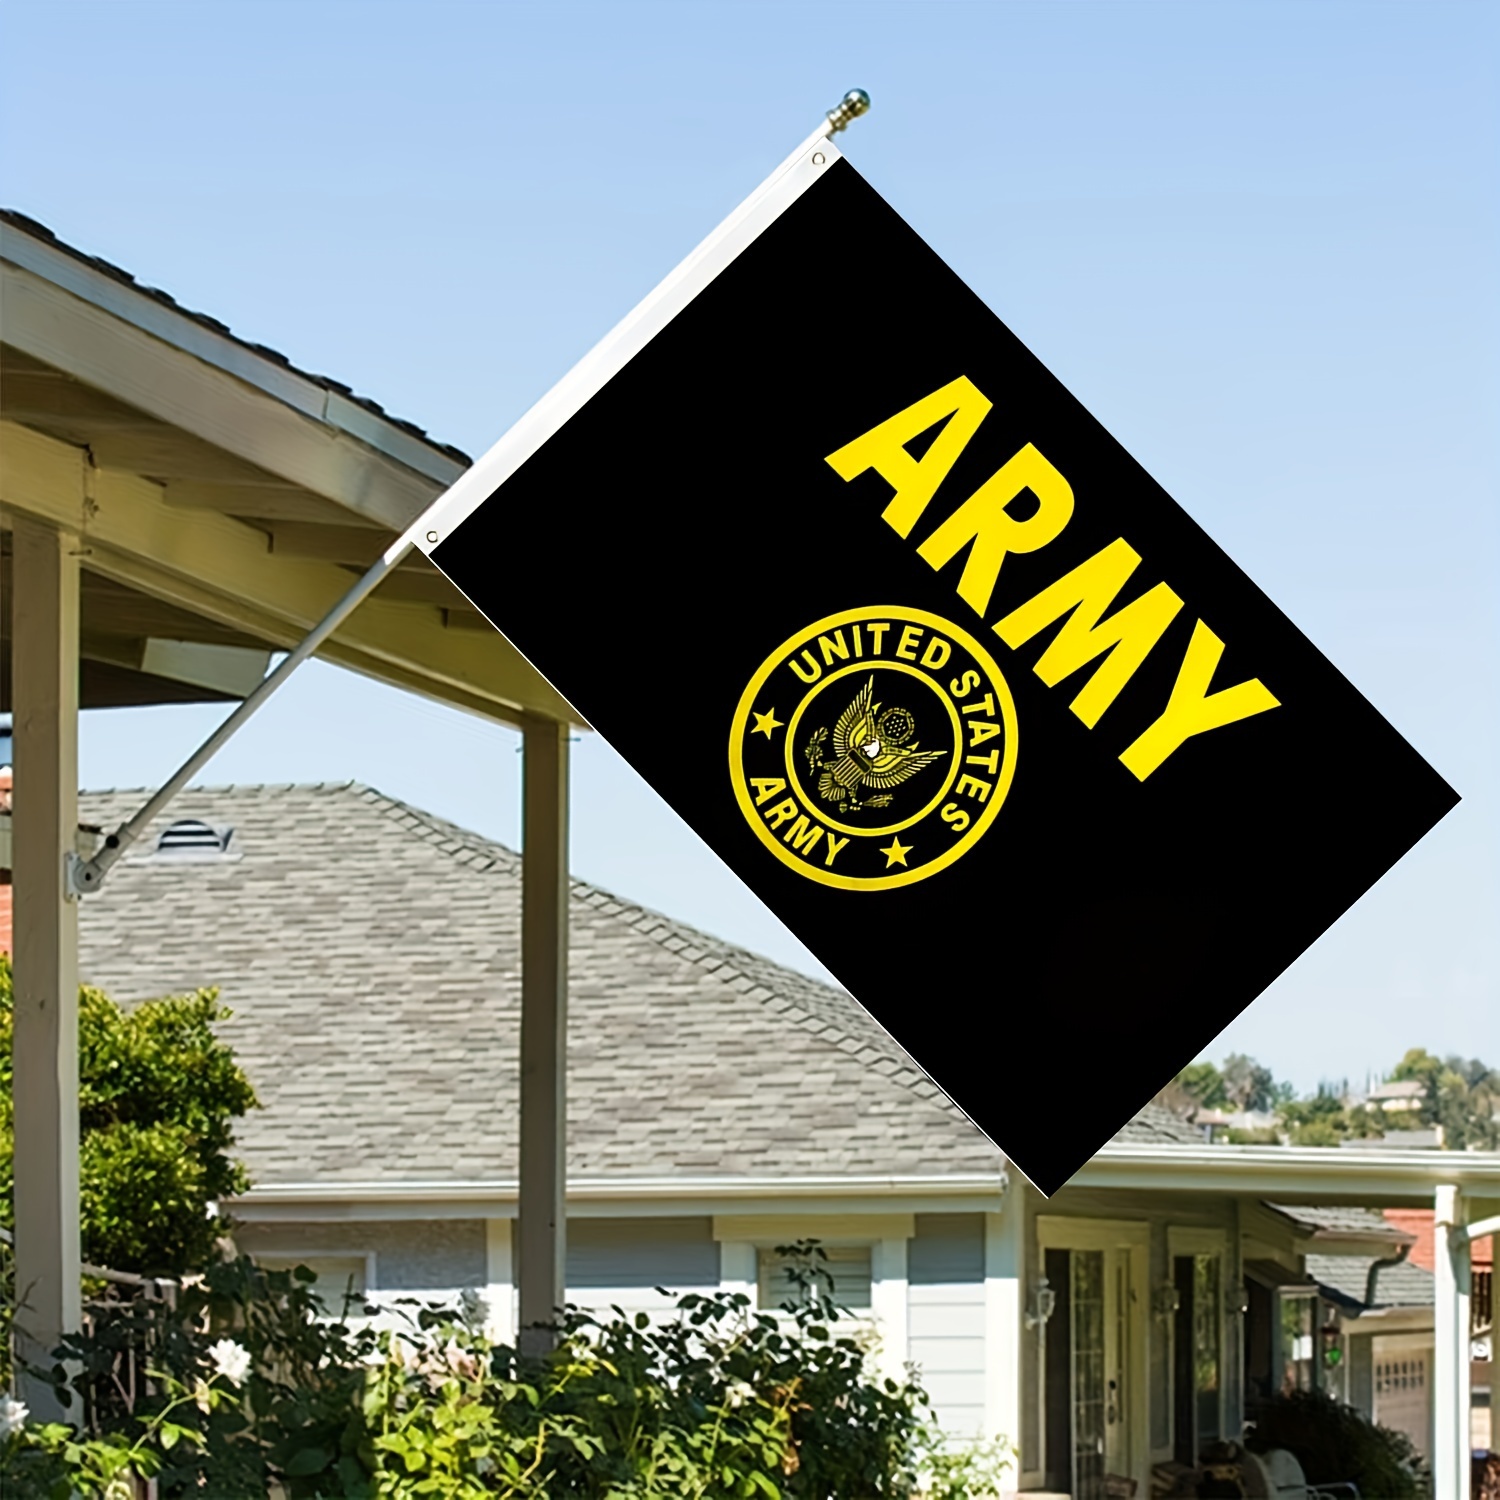 

United States Army Flag - 3ft X 5ft, Polyester Fabric, Bright Colors, Fade-resistant, Flagpole With 2 Grommets - Outdoor Decor